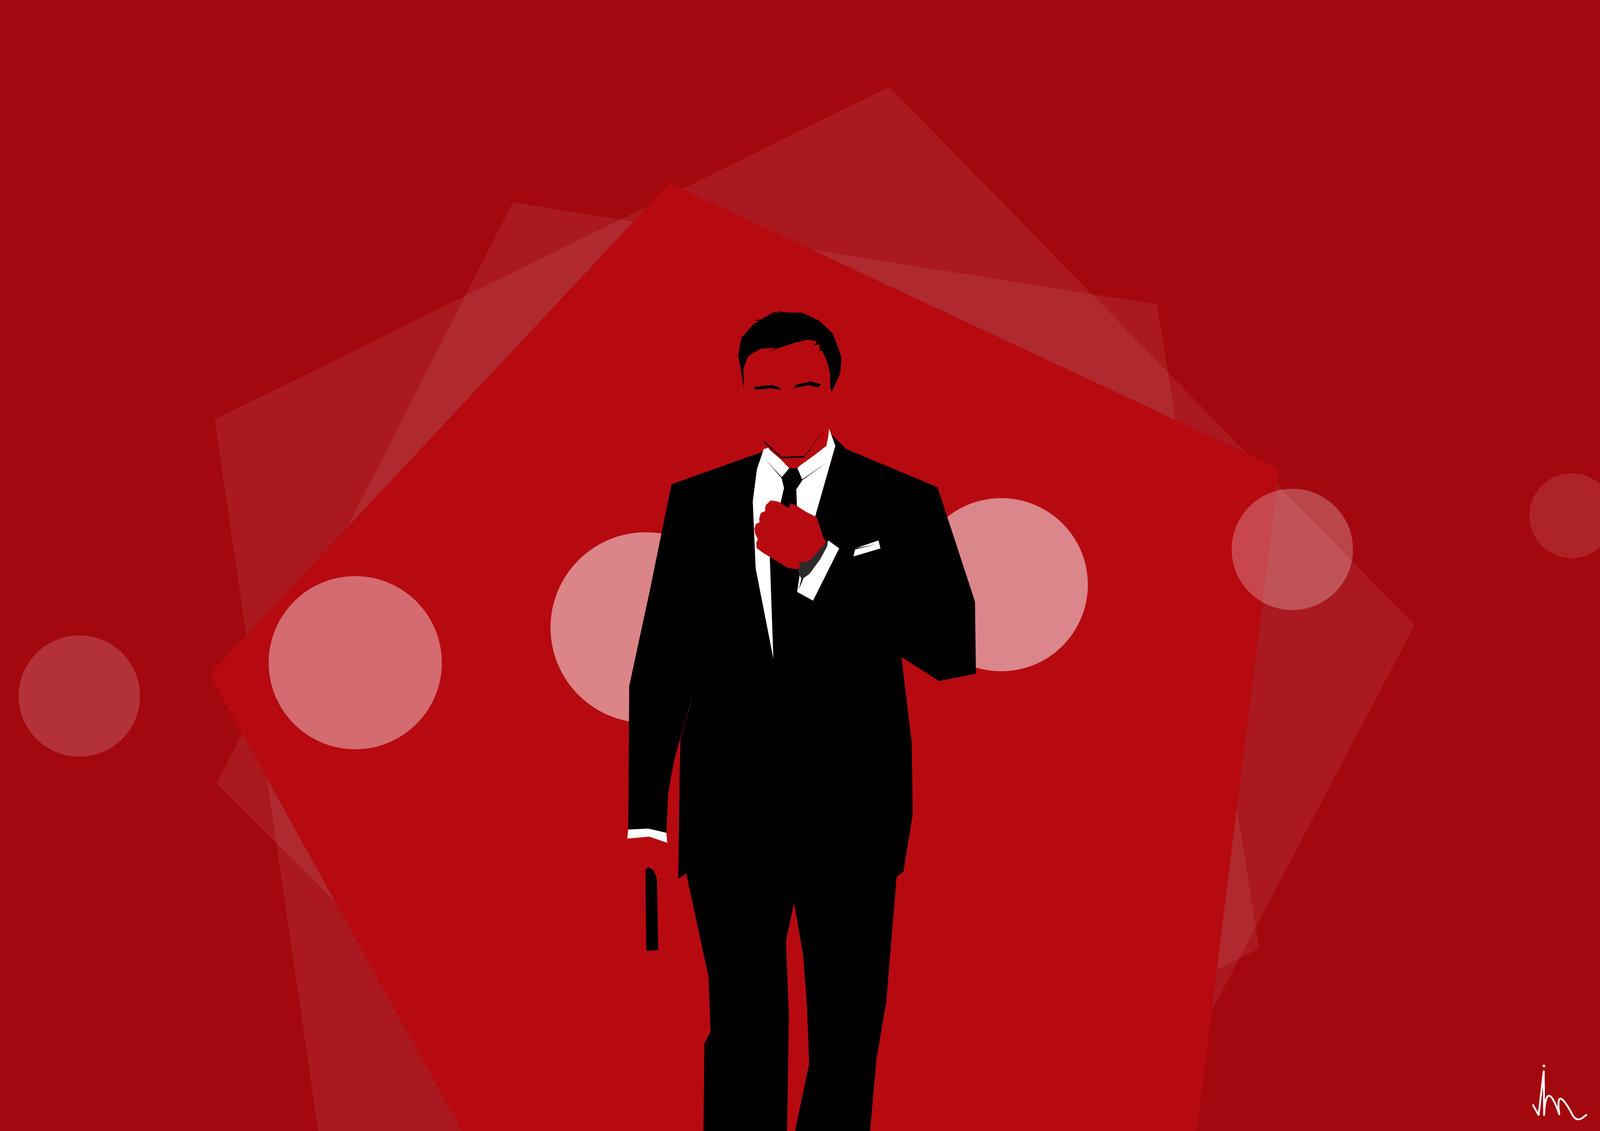 Thanks for the love, agents! Here's another 007 wallpaper I